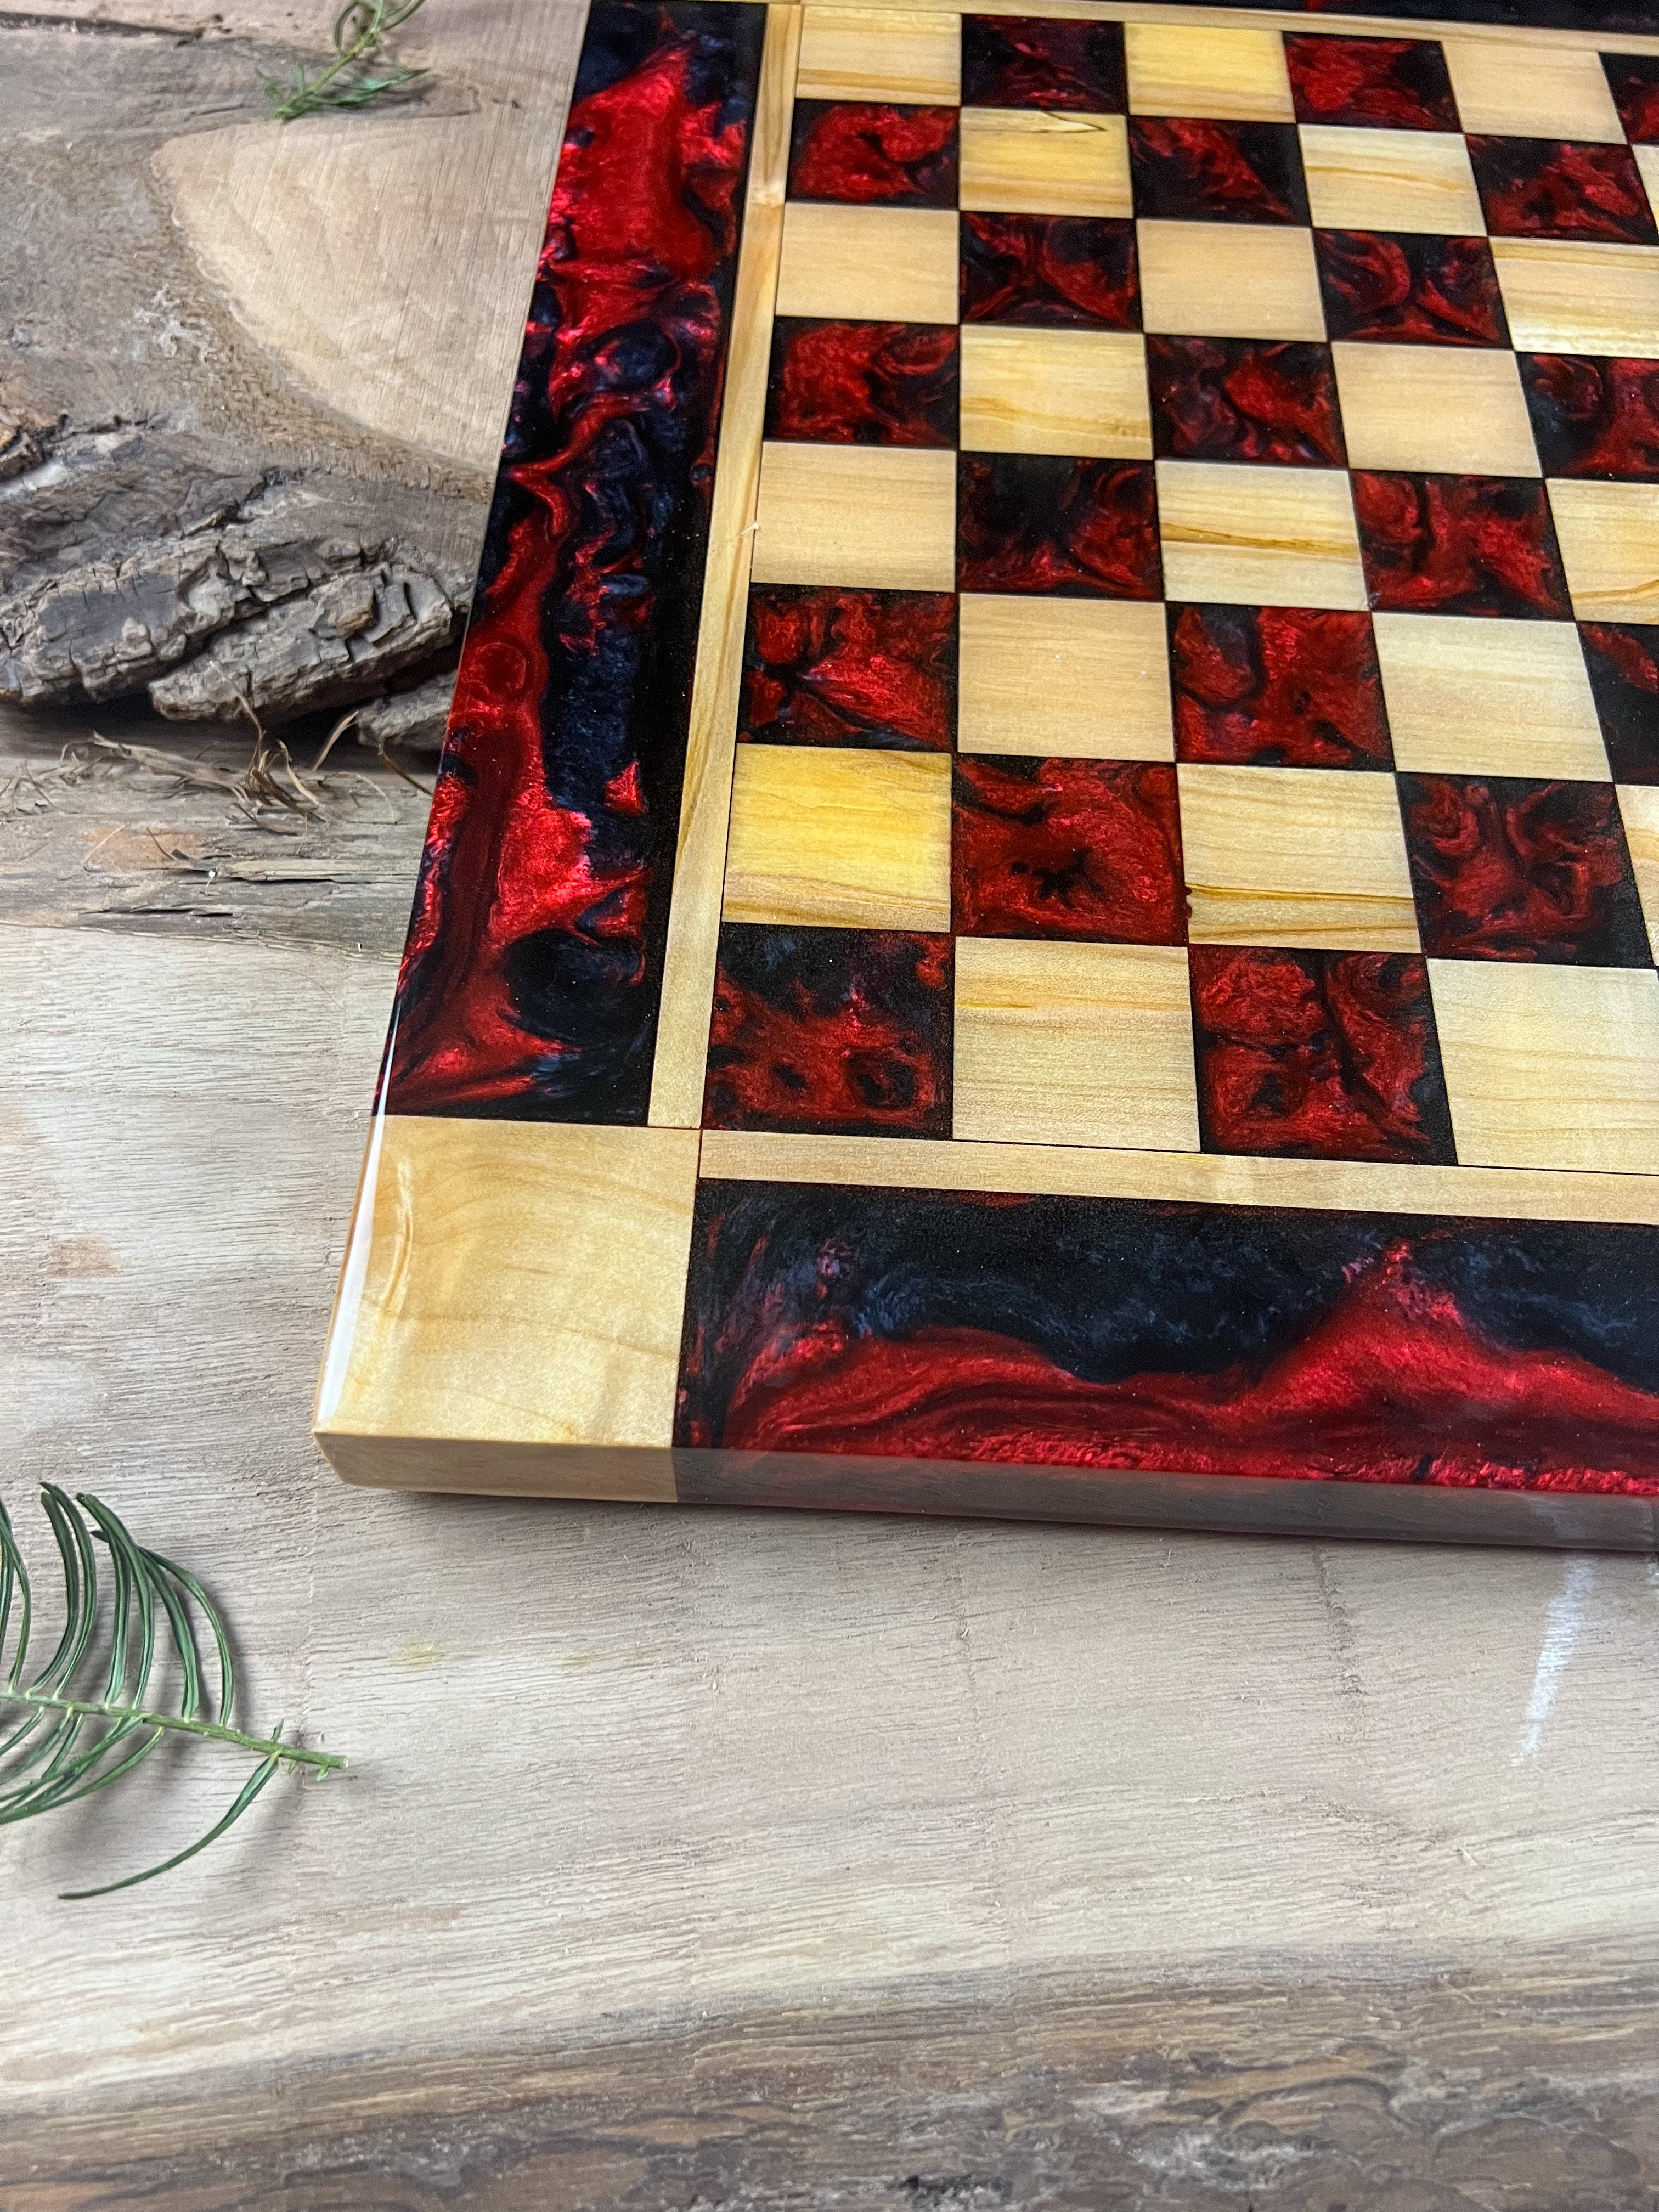 Red and Black Maple Wood Chess Board (With Border)